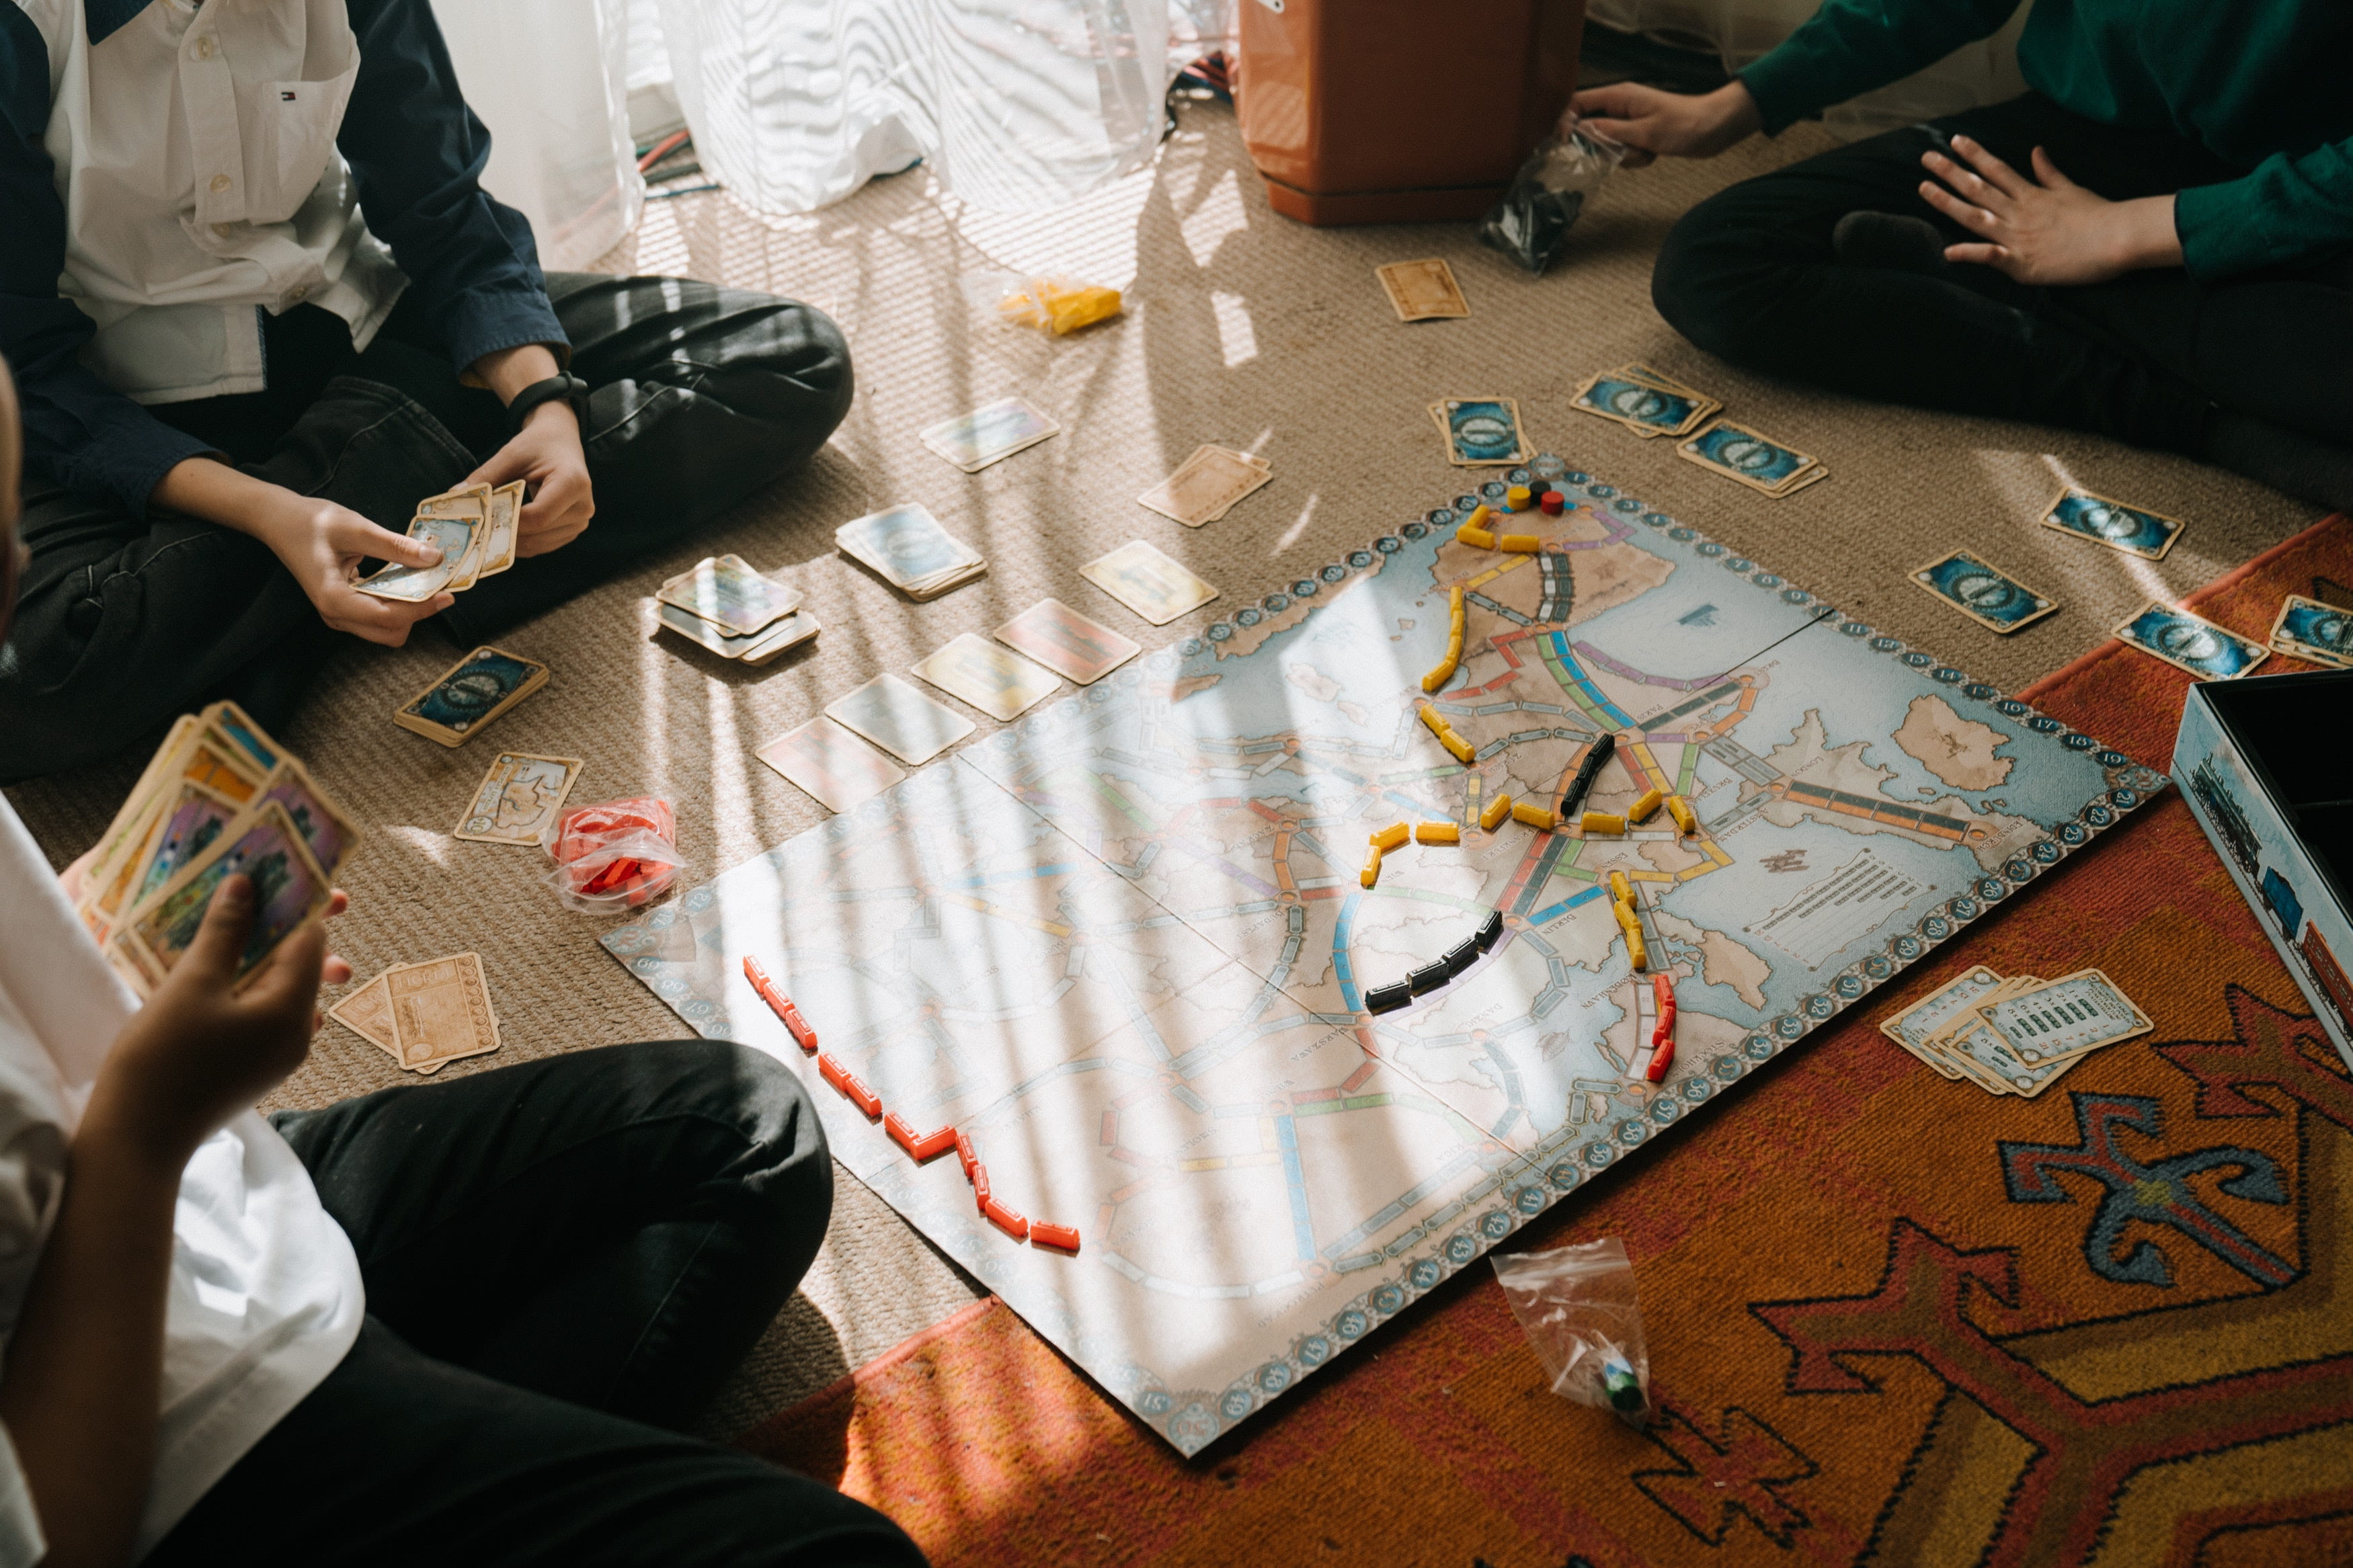 Group of people sitting on floor around a board game